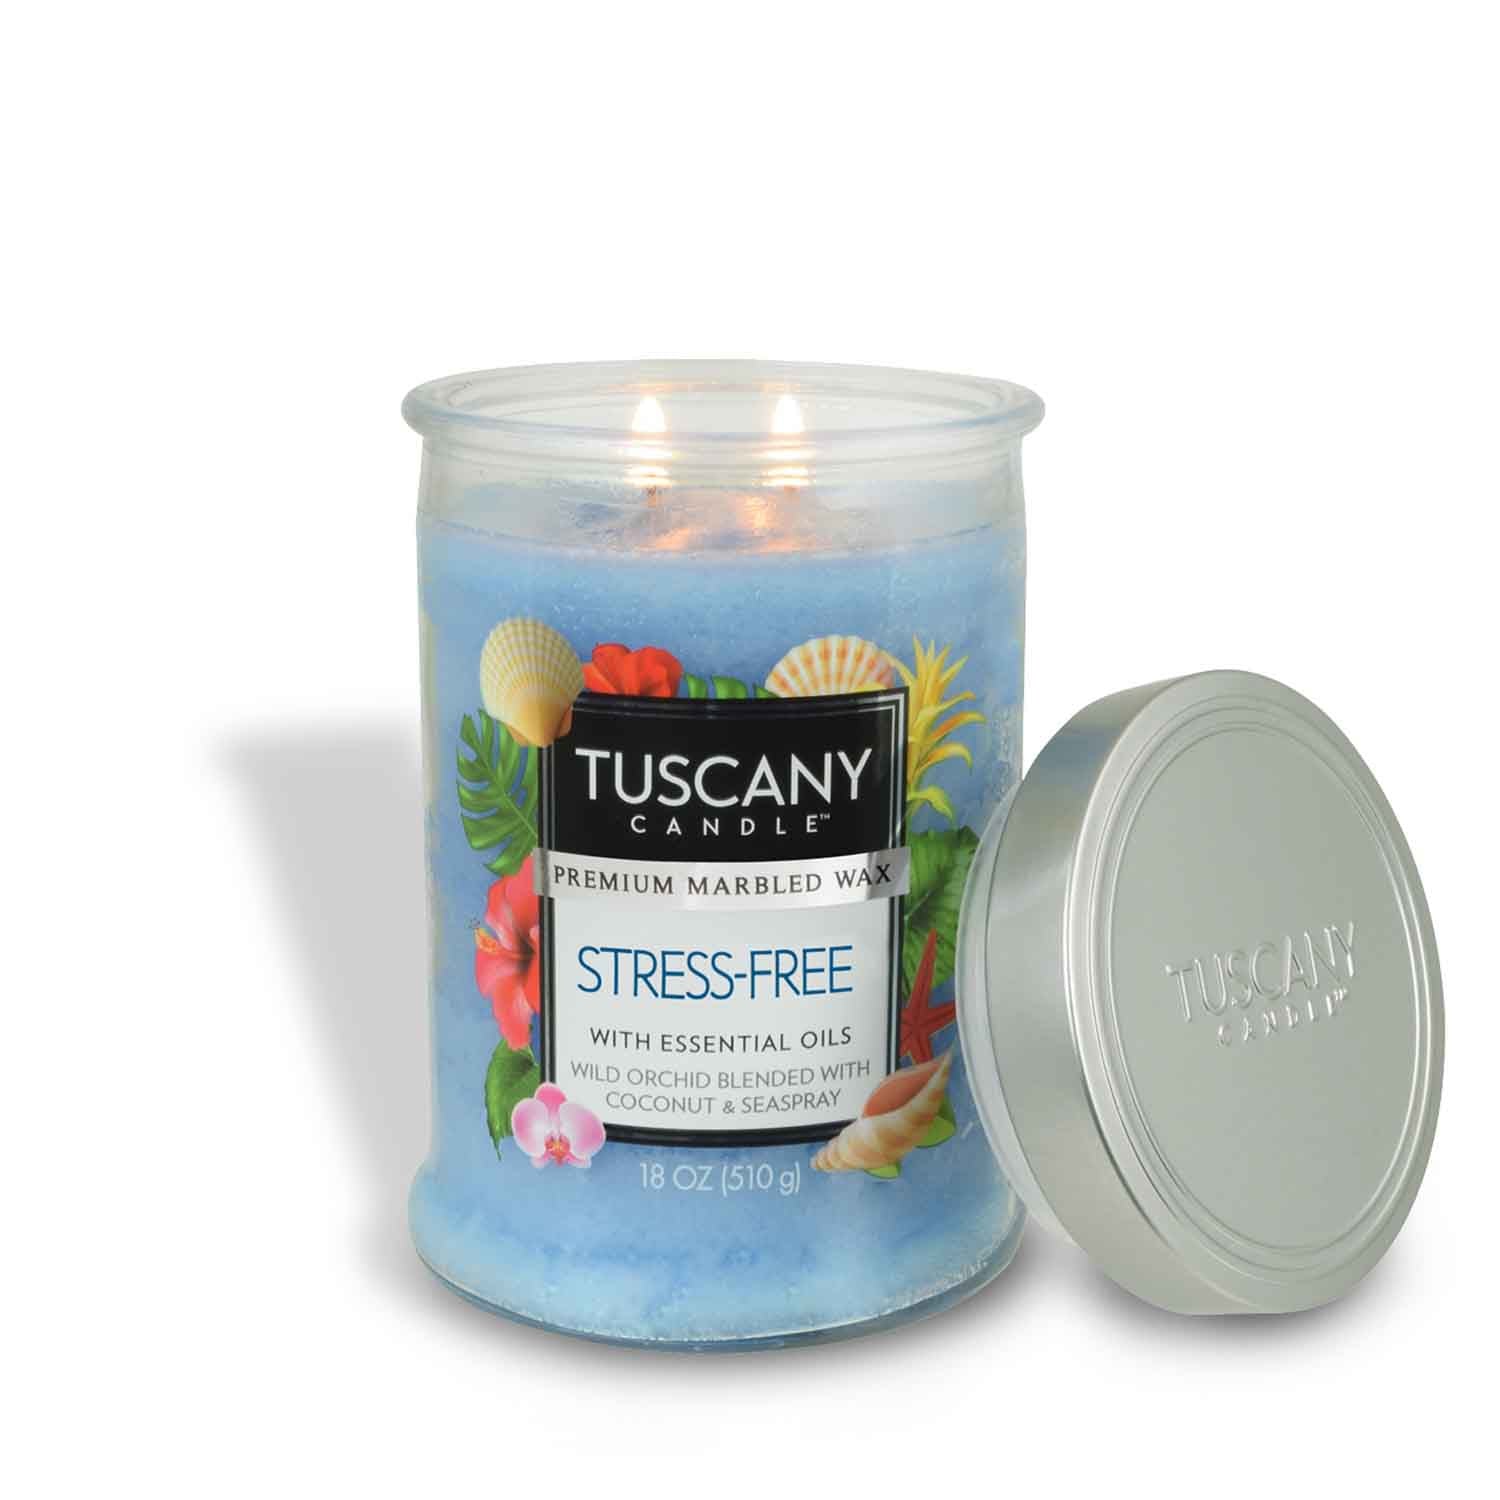 Stress Free - a fresh, relaxing candle